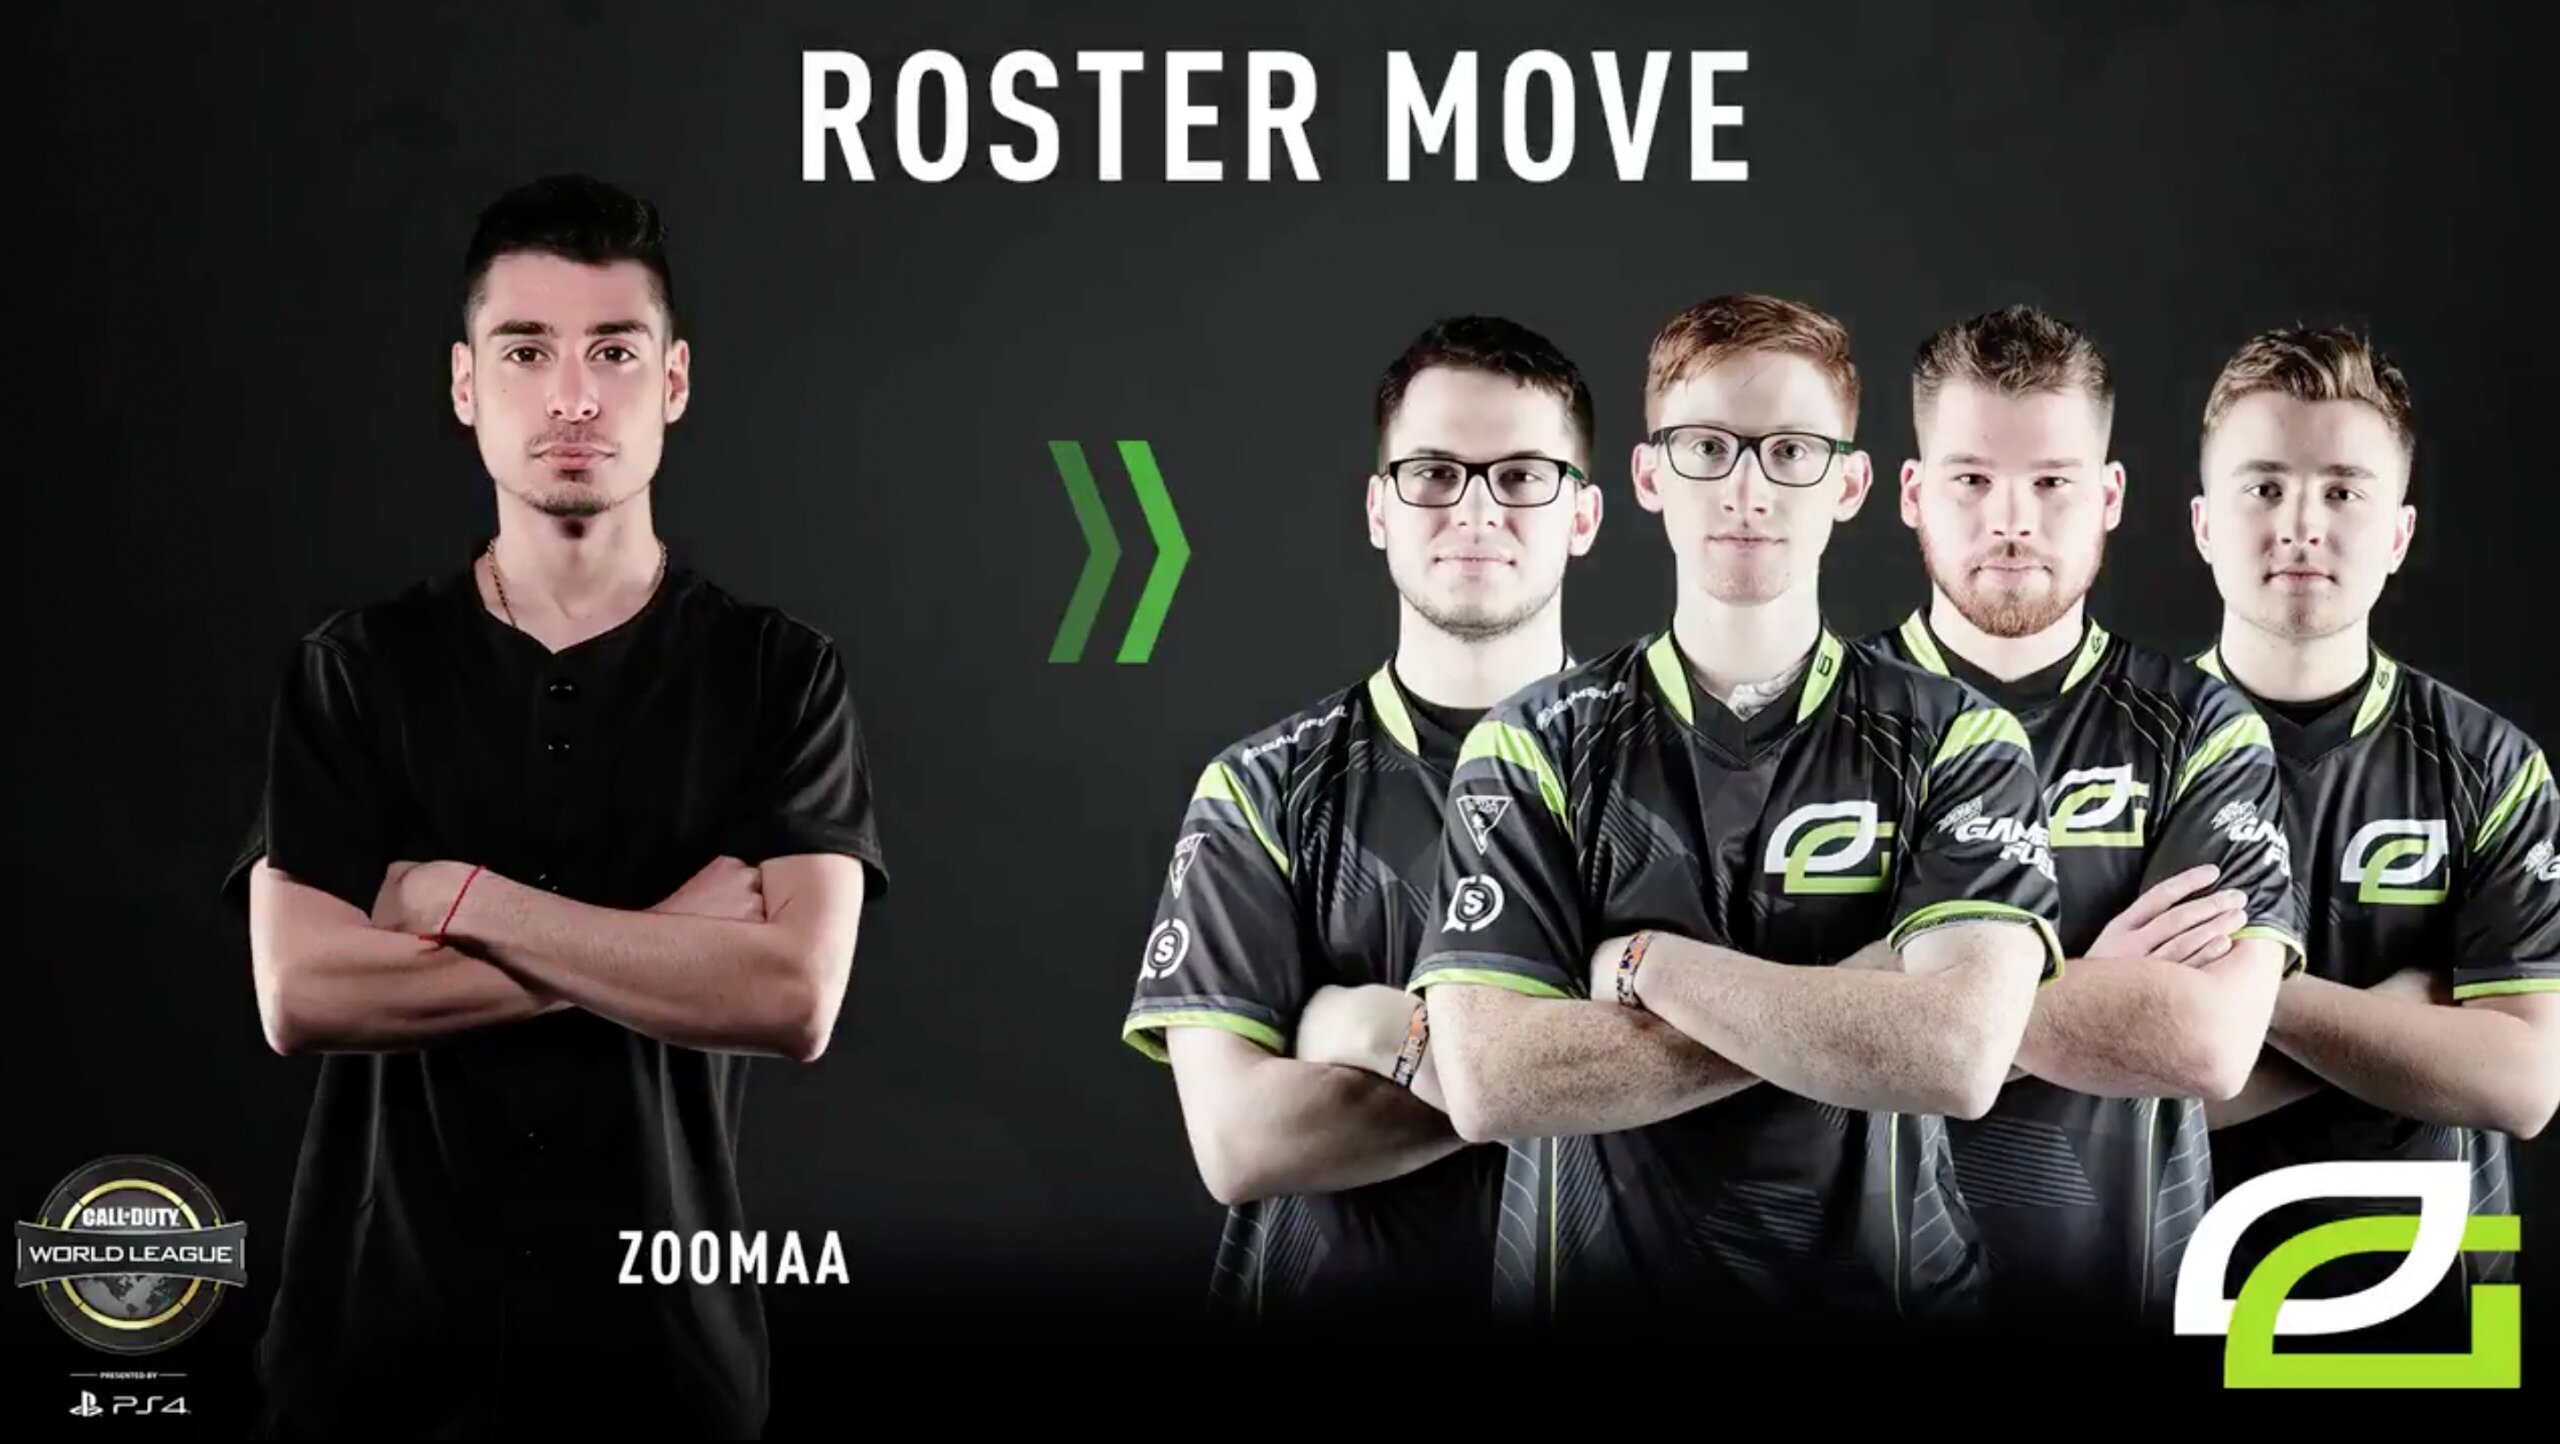 OpTic Gaming may be the favorites after winning CWL Las Vegas, but the squad will debut tonight without their MVP player, Dashy.